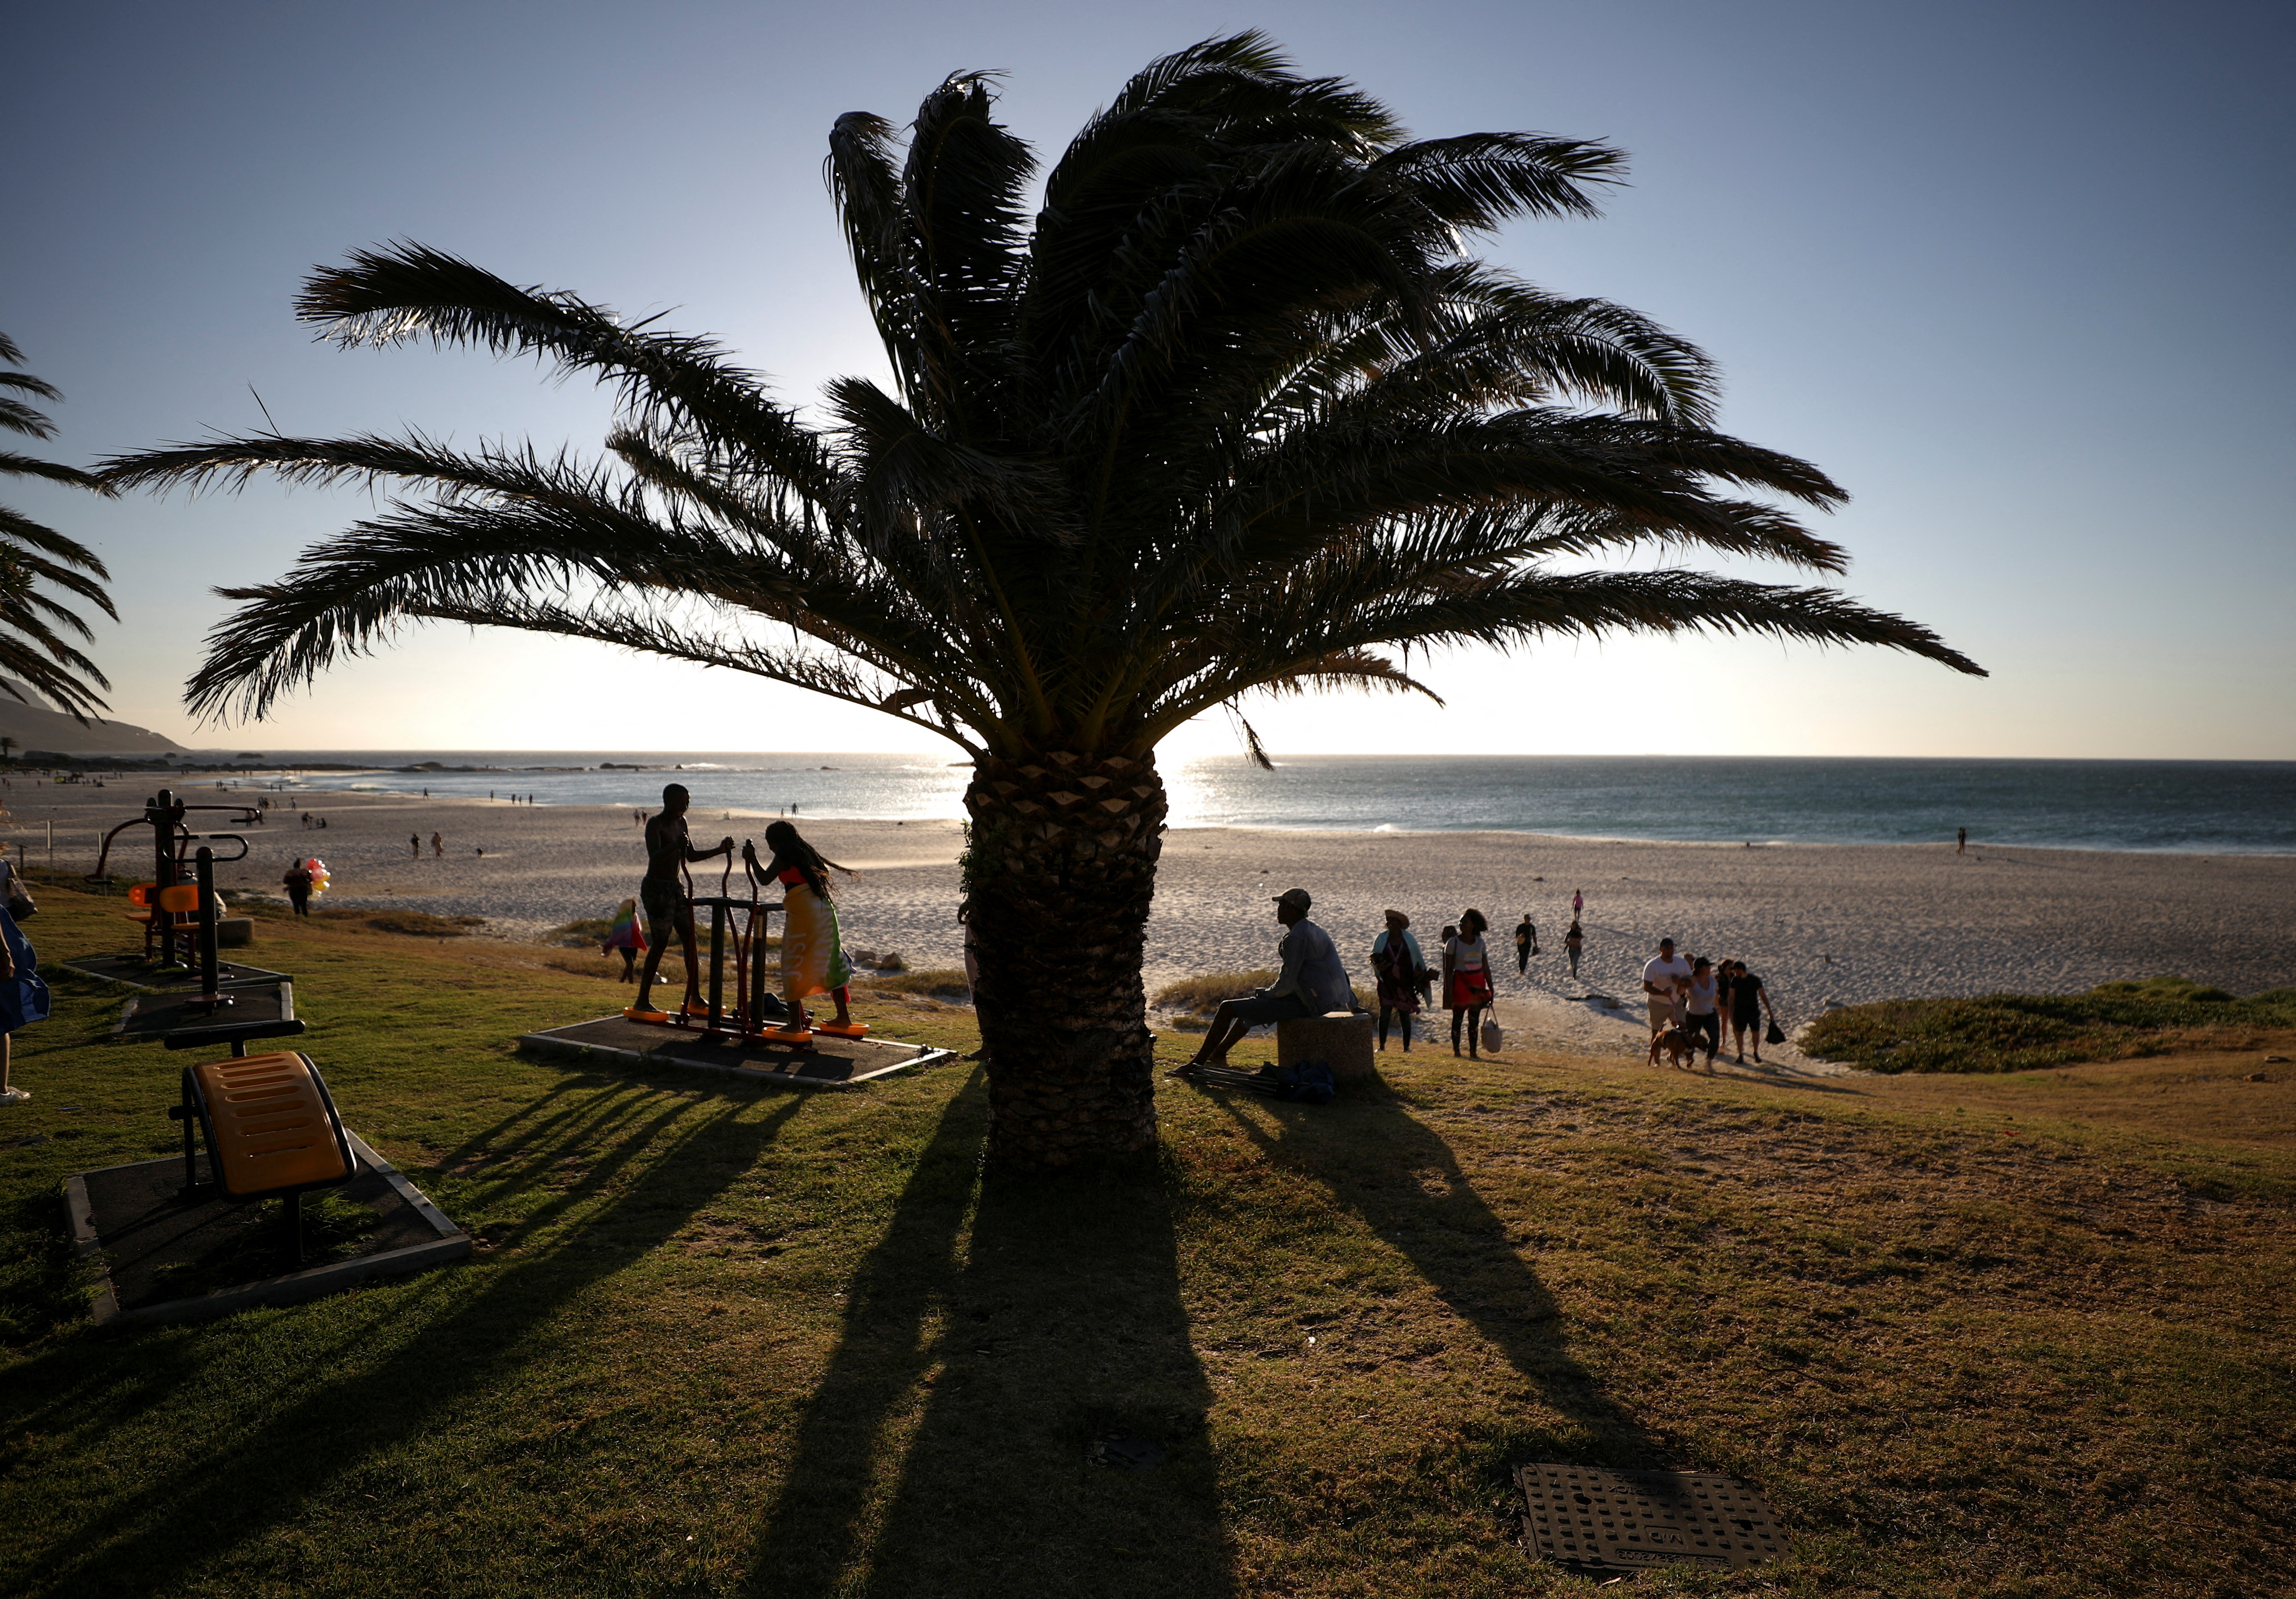 Vistors take in the sunlight at Camps Bay beach in Cape Town